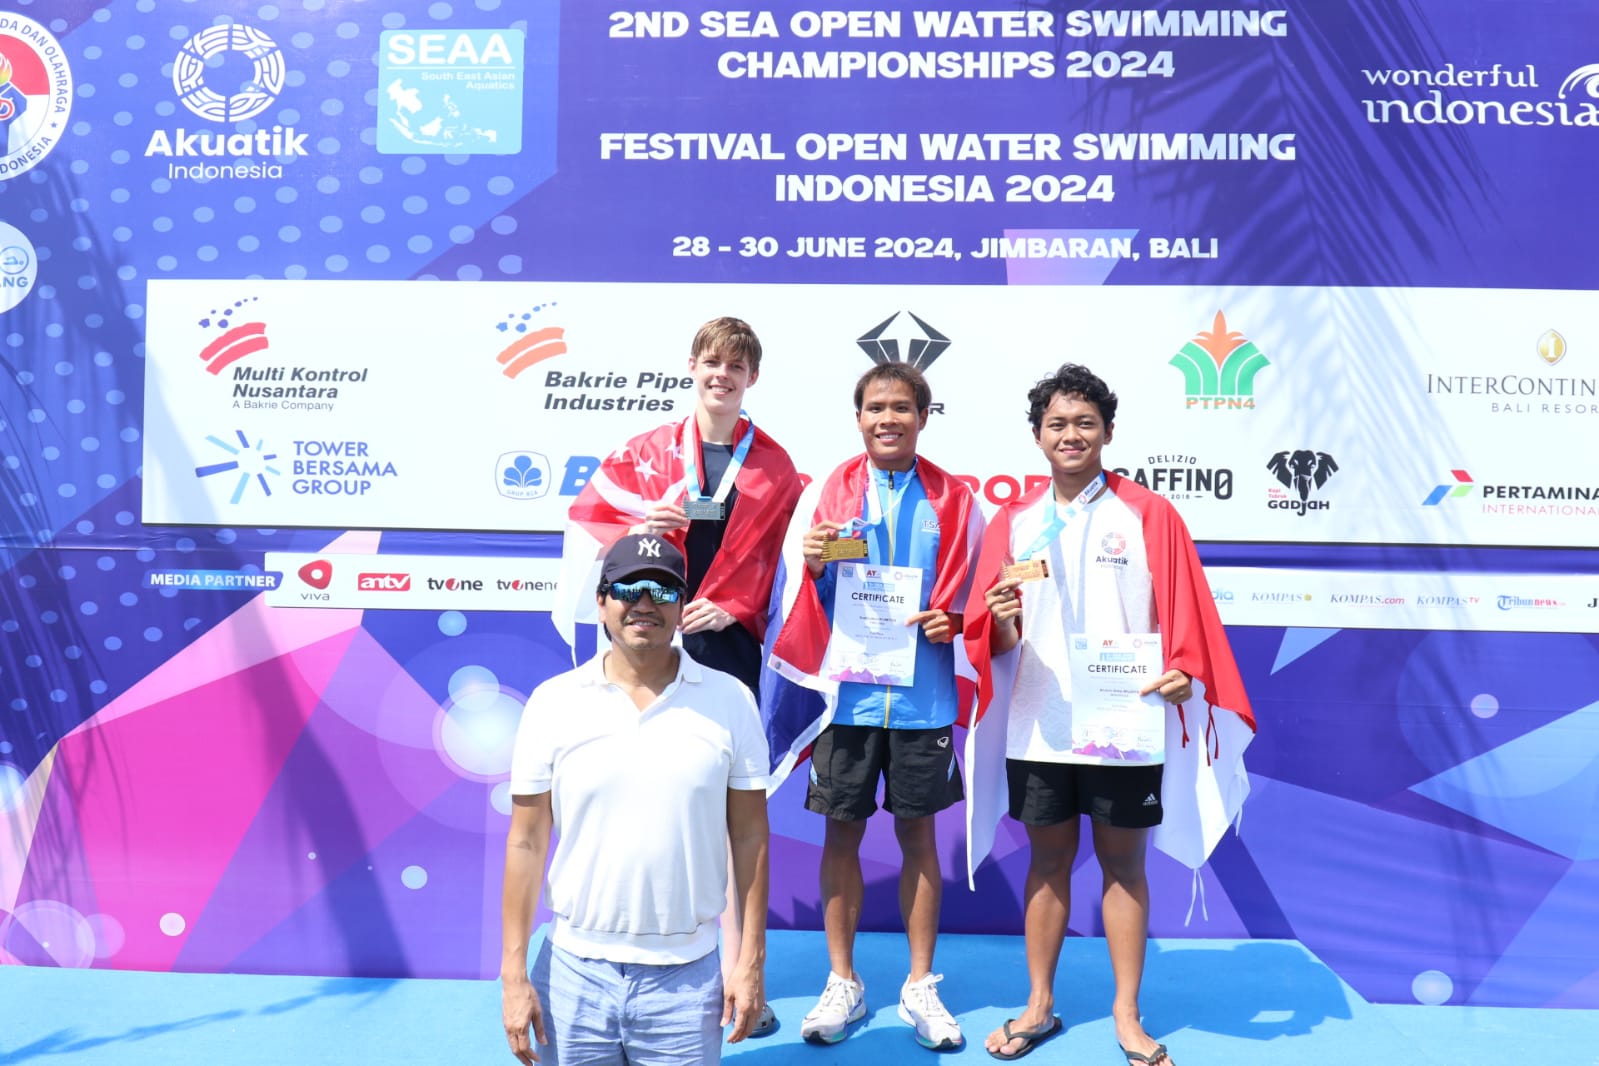 Hasil 2nd Southeast Asia Open Water Swimming Championship 2024, Indonesia Sabet 2 Emas